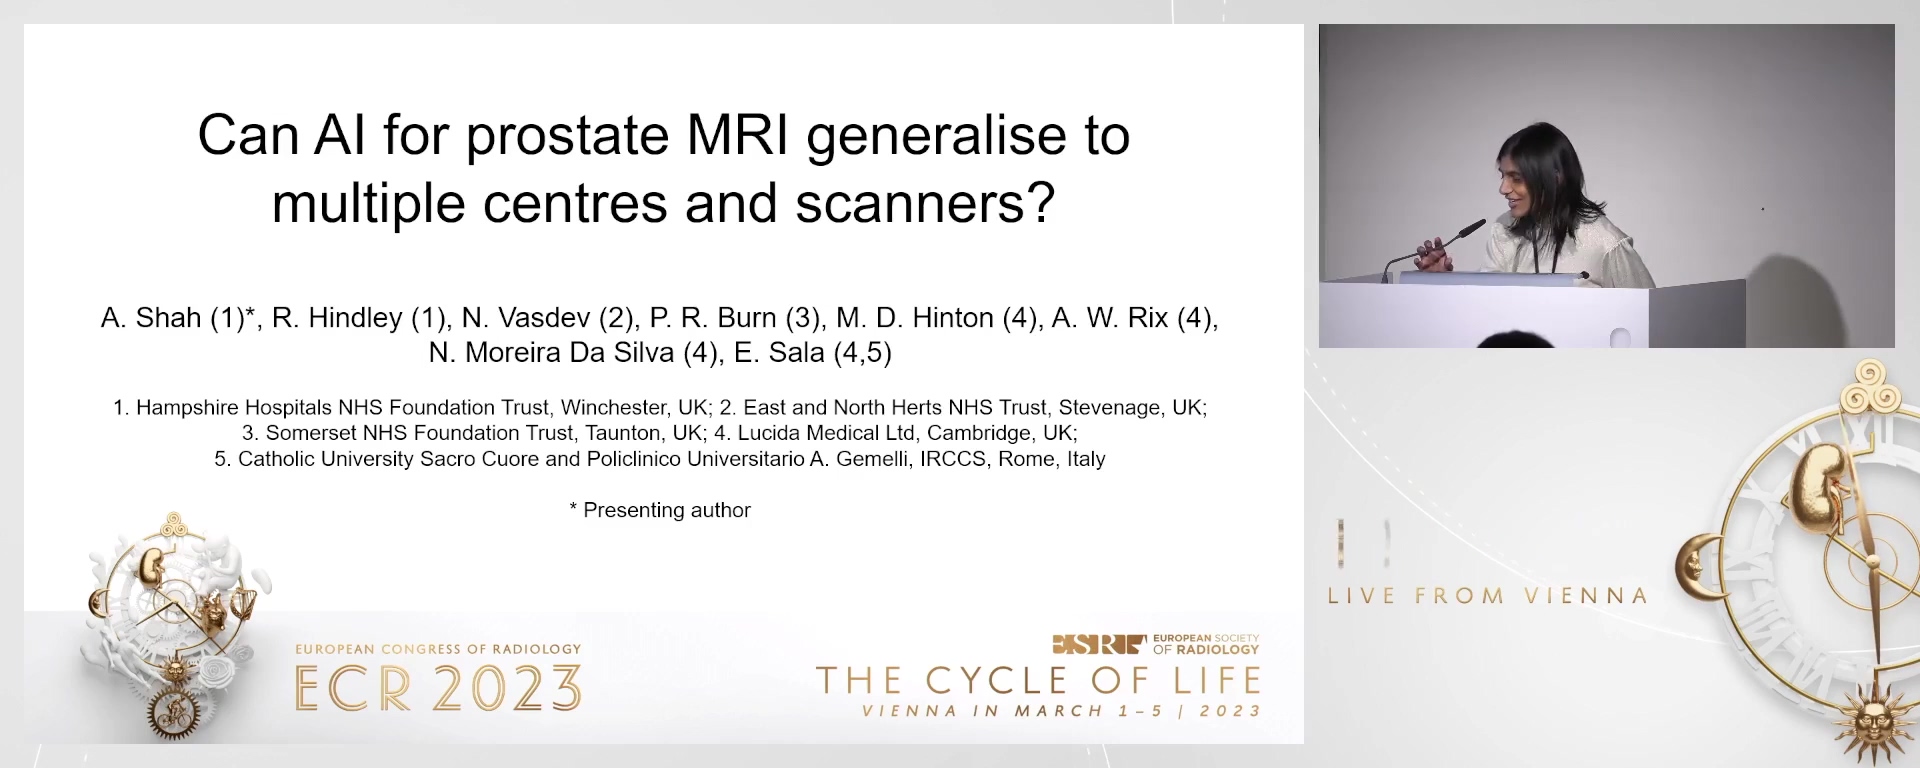 Can AI for prostate MRI generalise to multiple centres and scanners? - Aarti  Shah, Stockbridge / UK